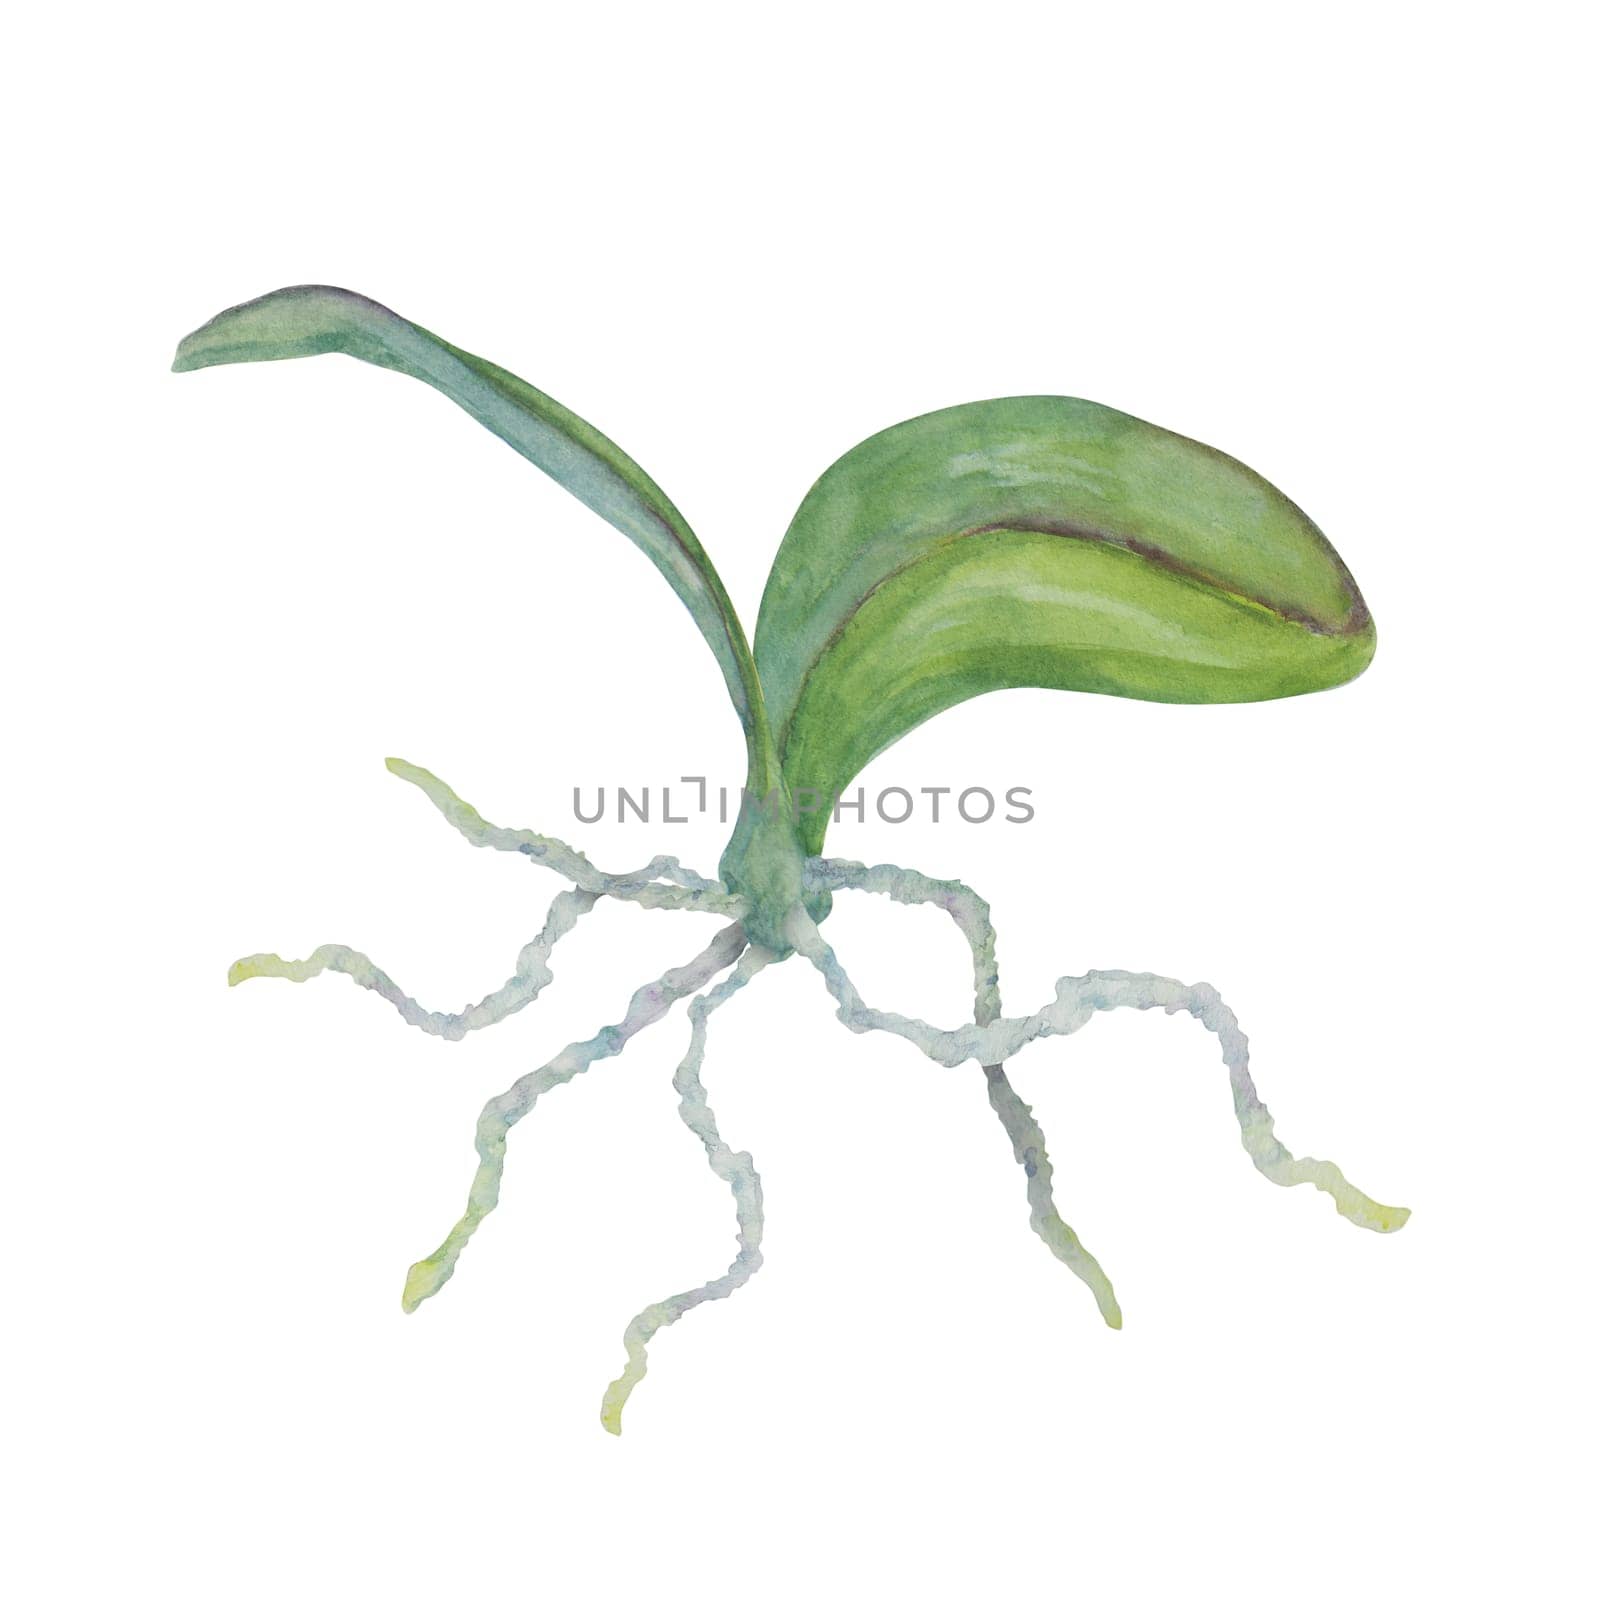 Green orchid leave in coconut. Delicate realistic botanical watercolor hand drawn illustration. Clipart for wedding invitations, decor, textiles, gifts, packaging and floristry.